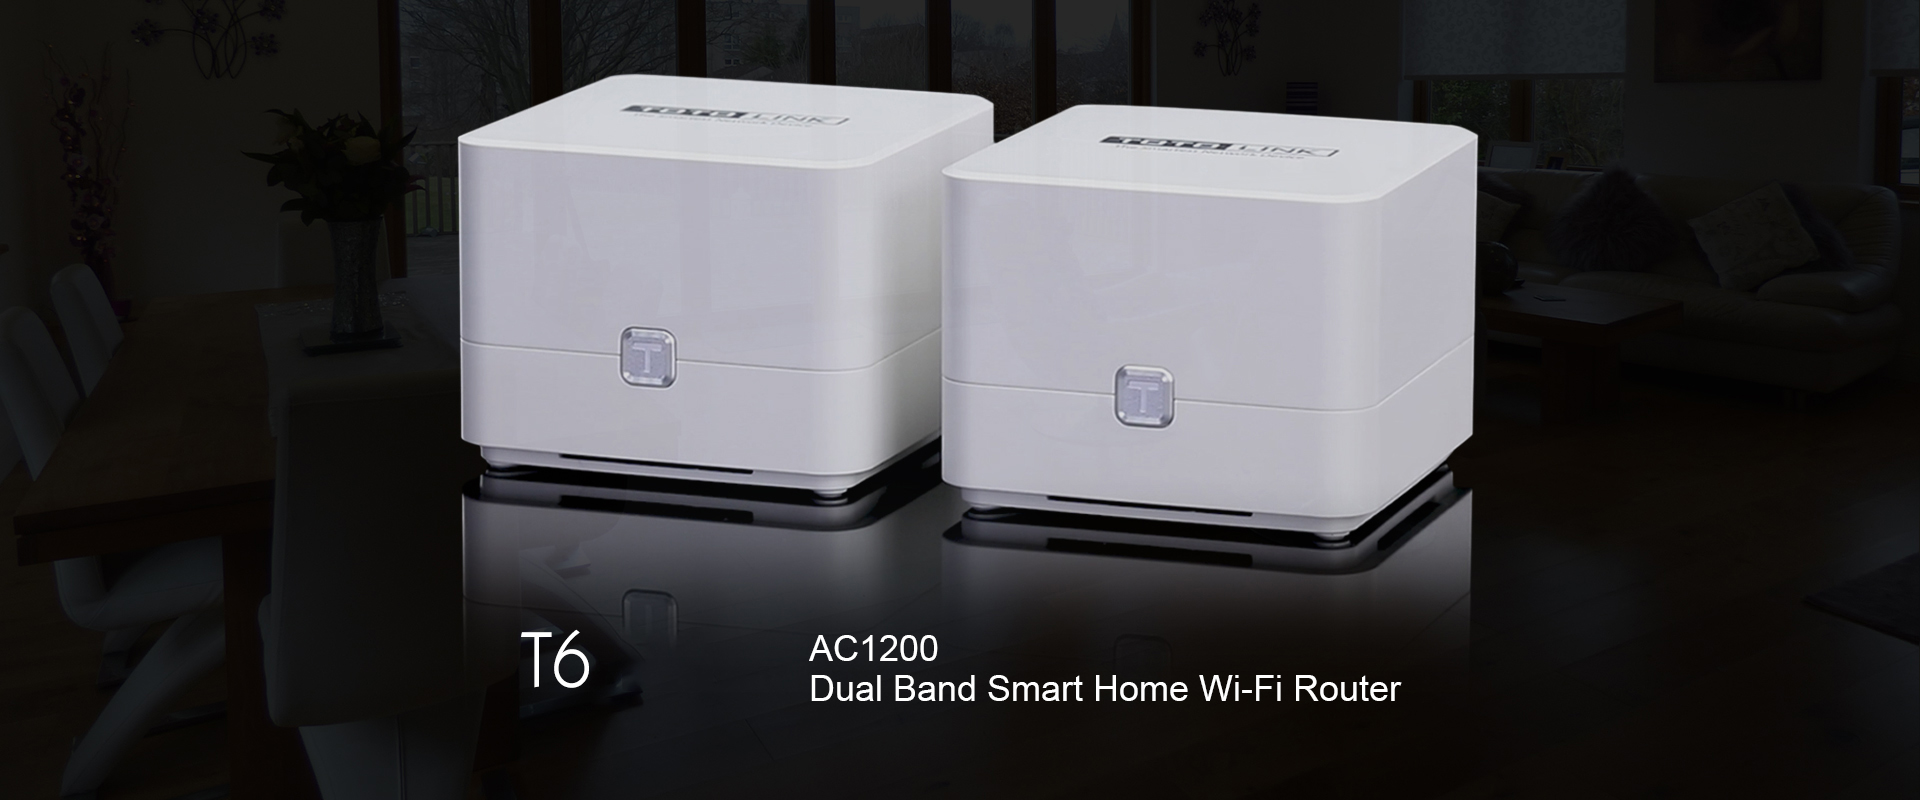 T6 AC1200 Dual Band Smart Home Wi-Fi Router